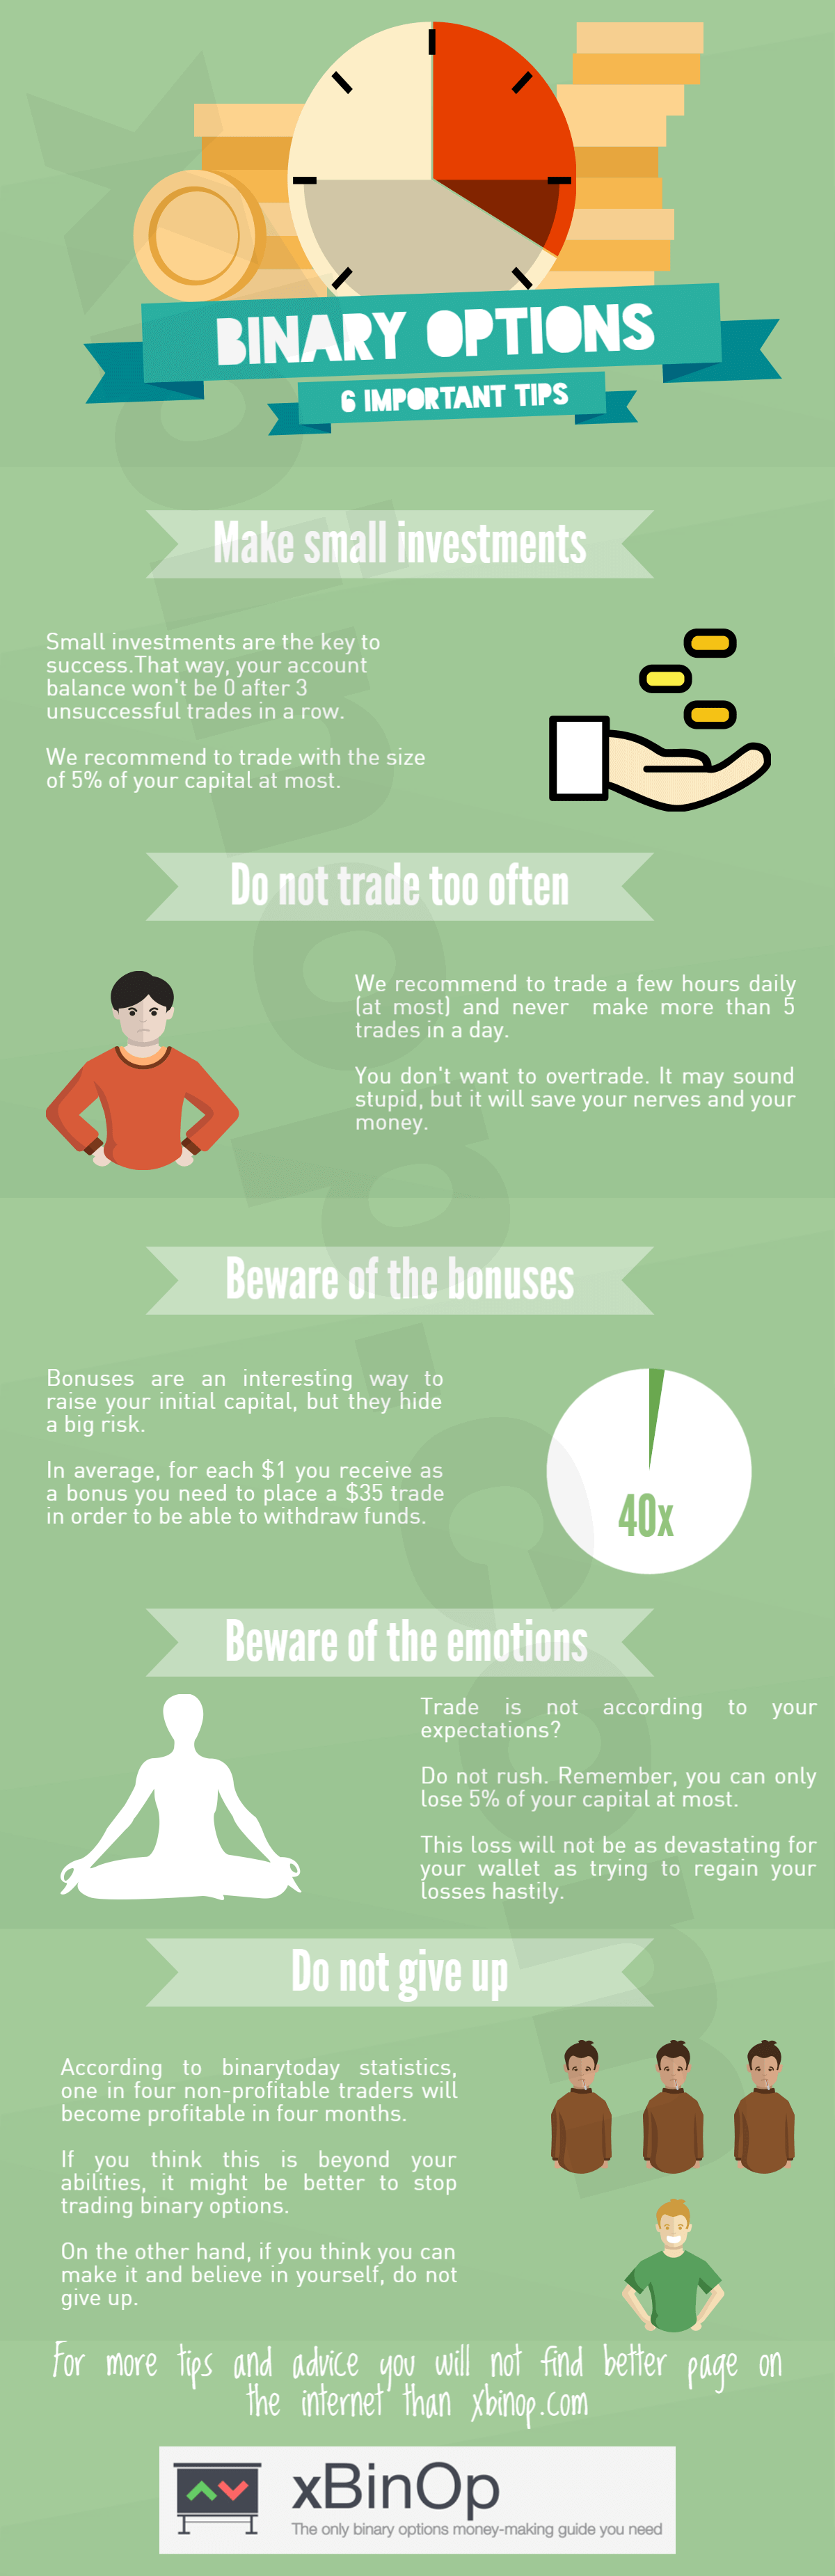 6 Important tips for trading